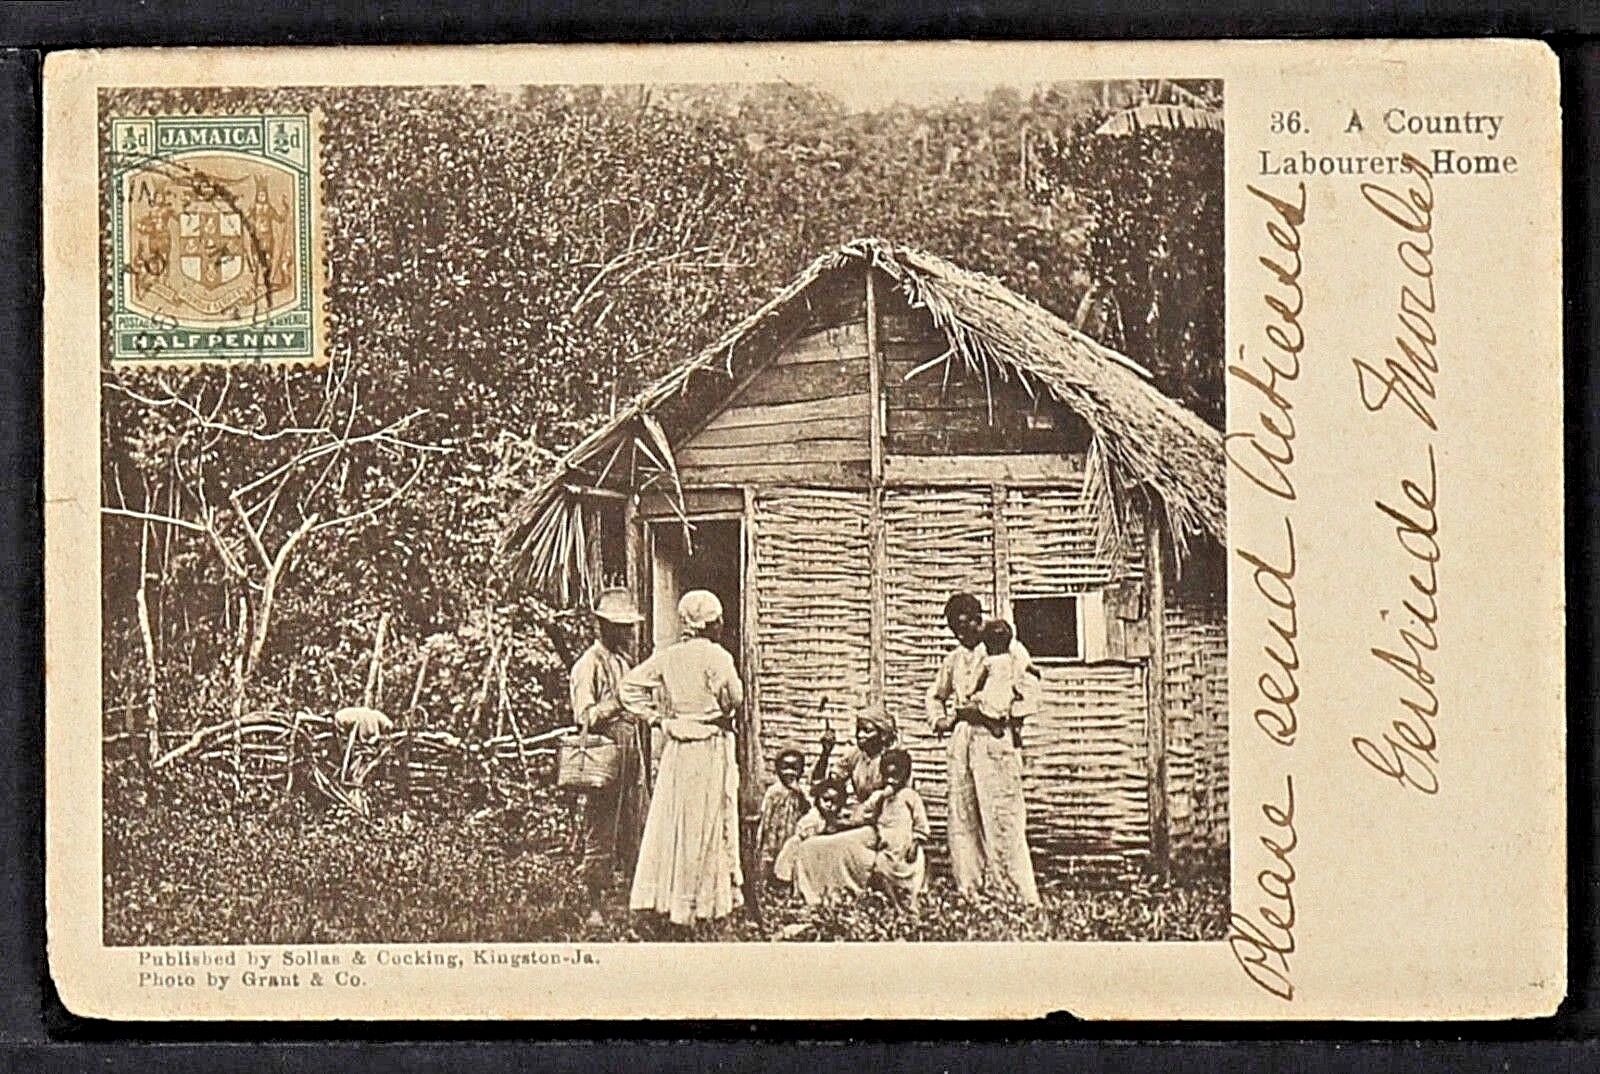 JAMAICA 02-KINGSTON - A Country Labourers Home  (Sent to Cvba in 1905)